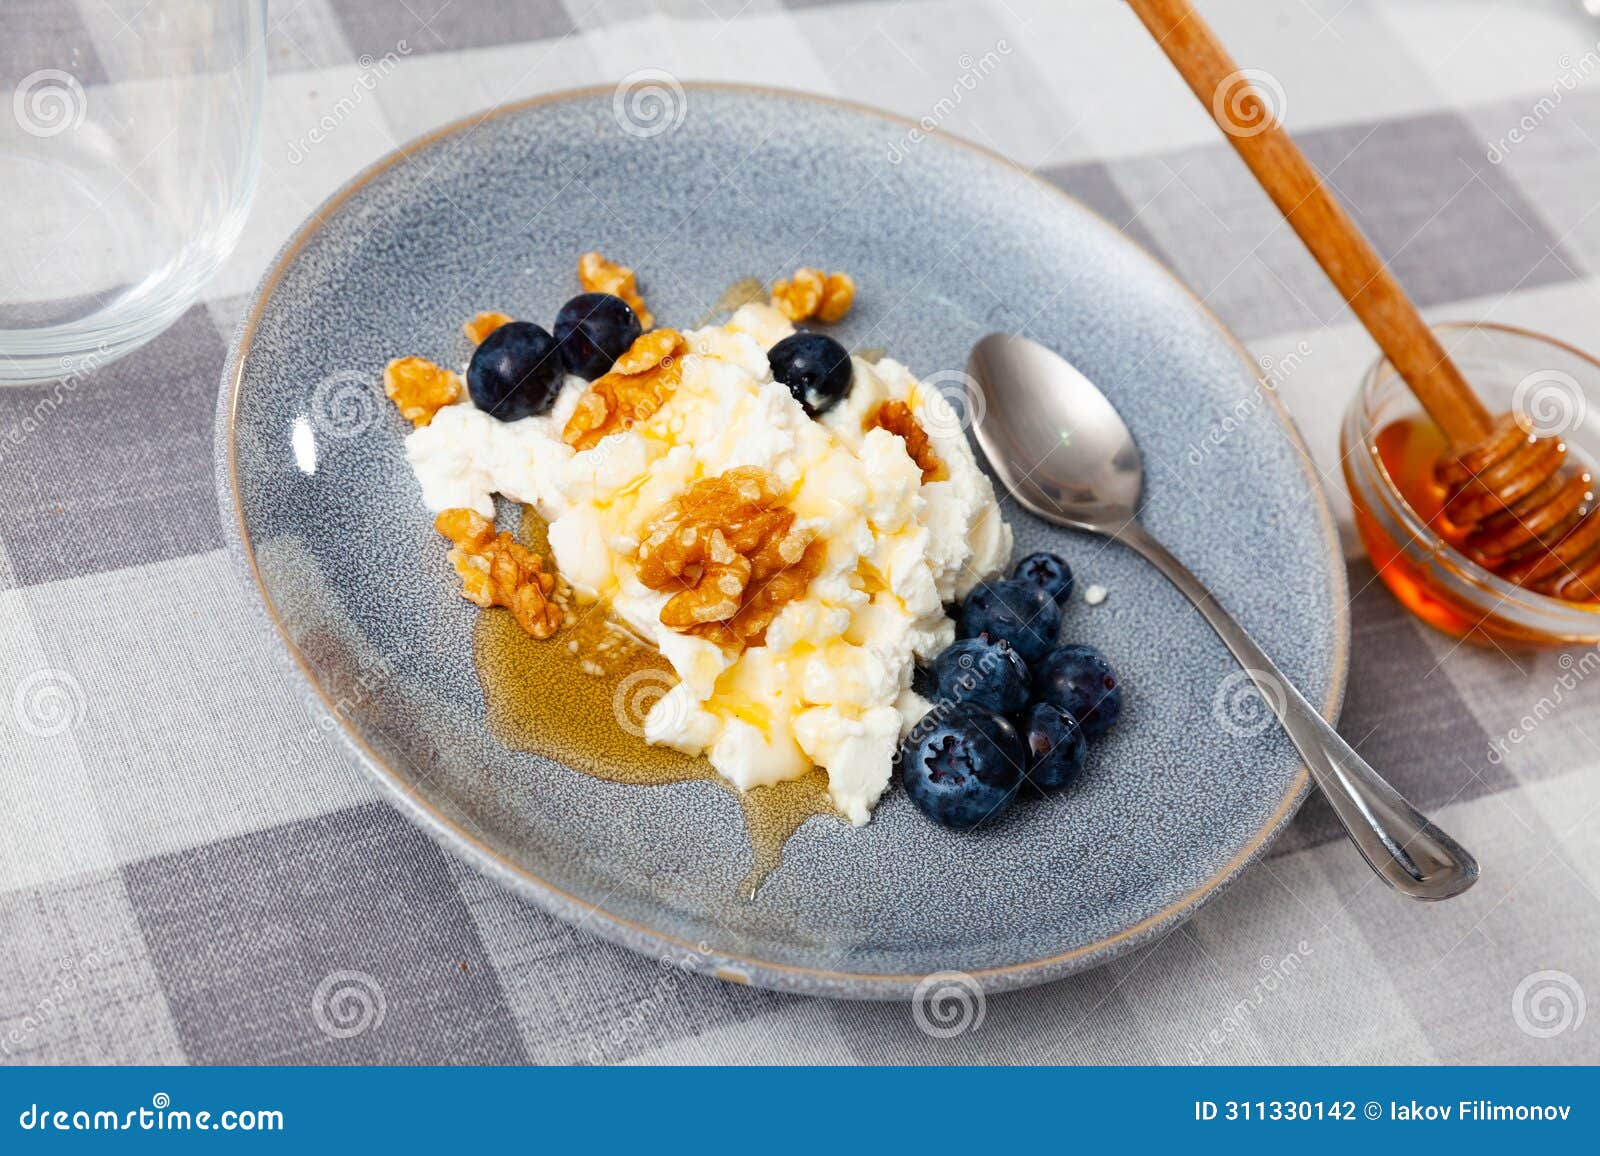 cheese and honey dessert with honey, walnuts and blueberries - mato con miel - catalan cuisine